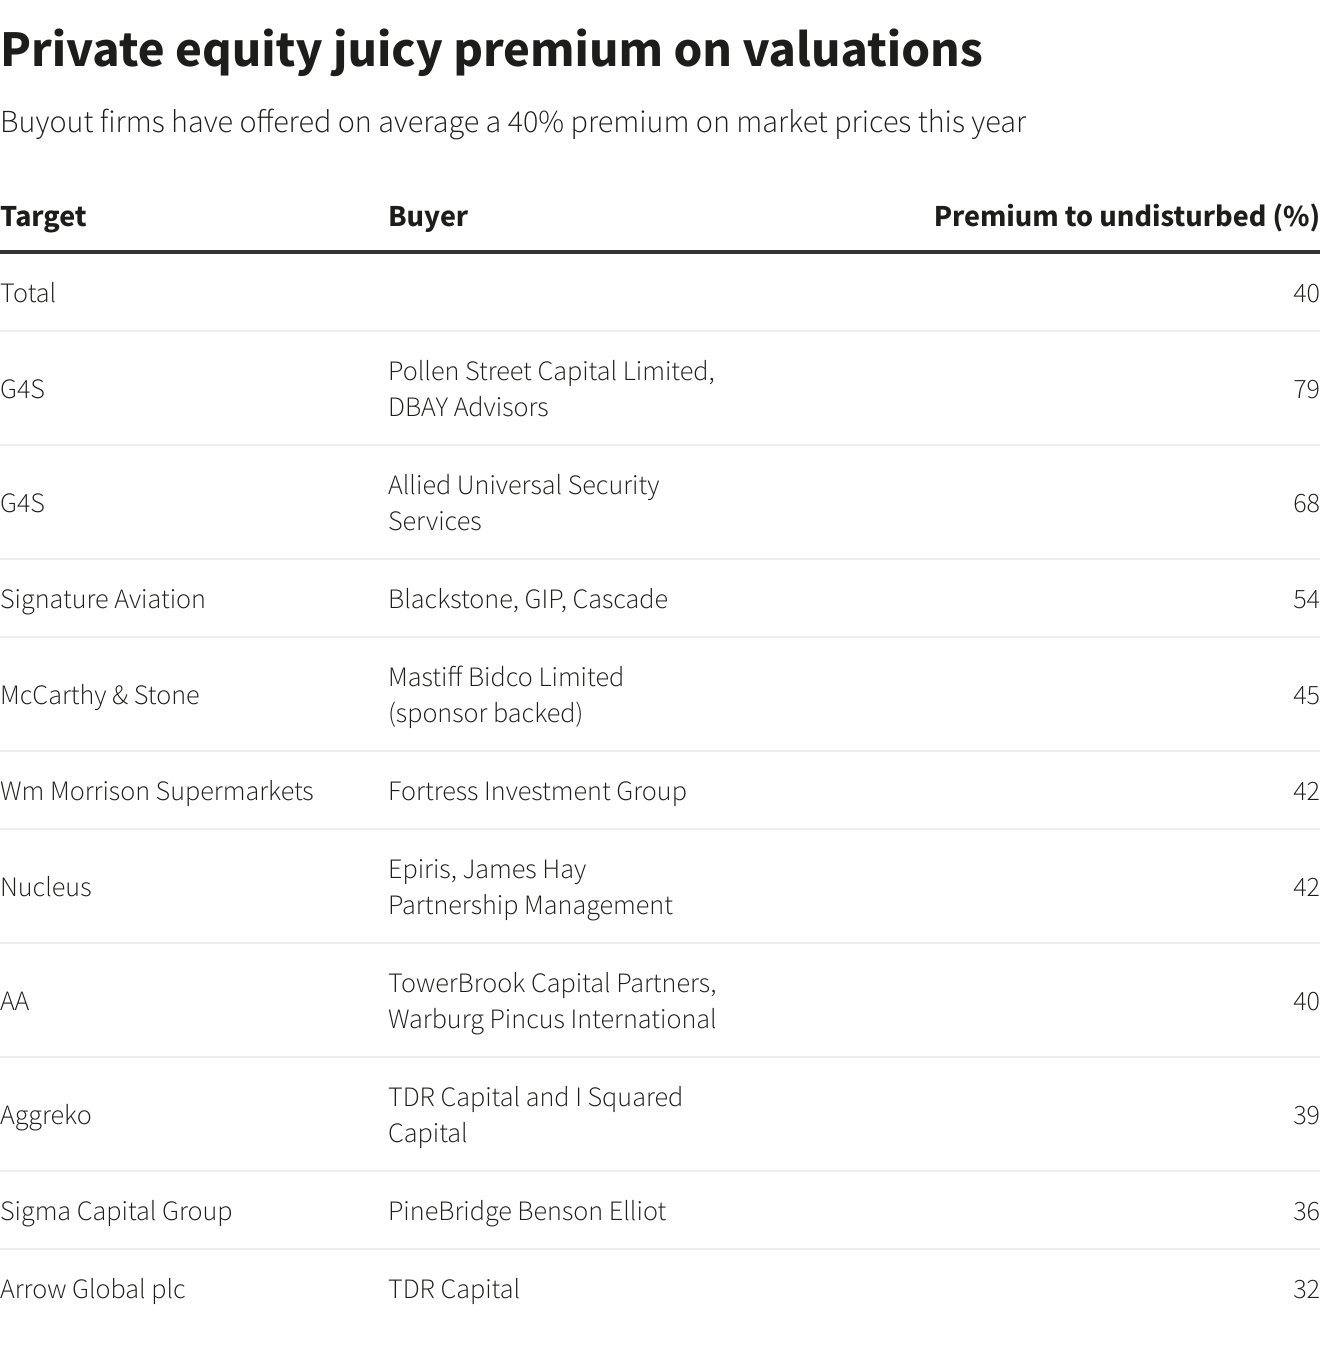 Private equity juicy premium on valuations